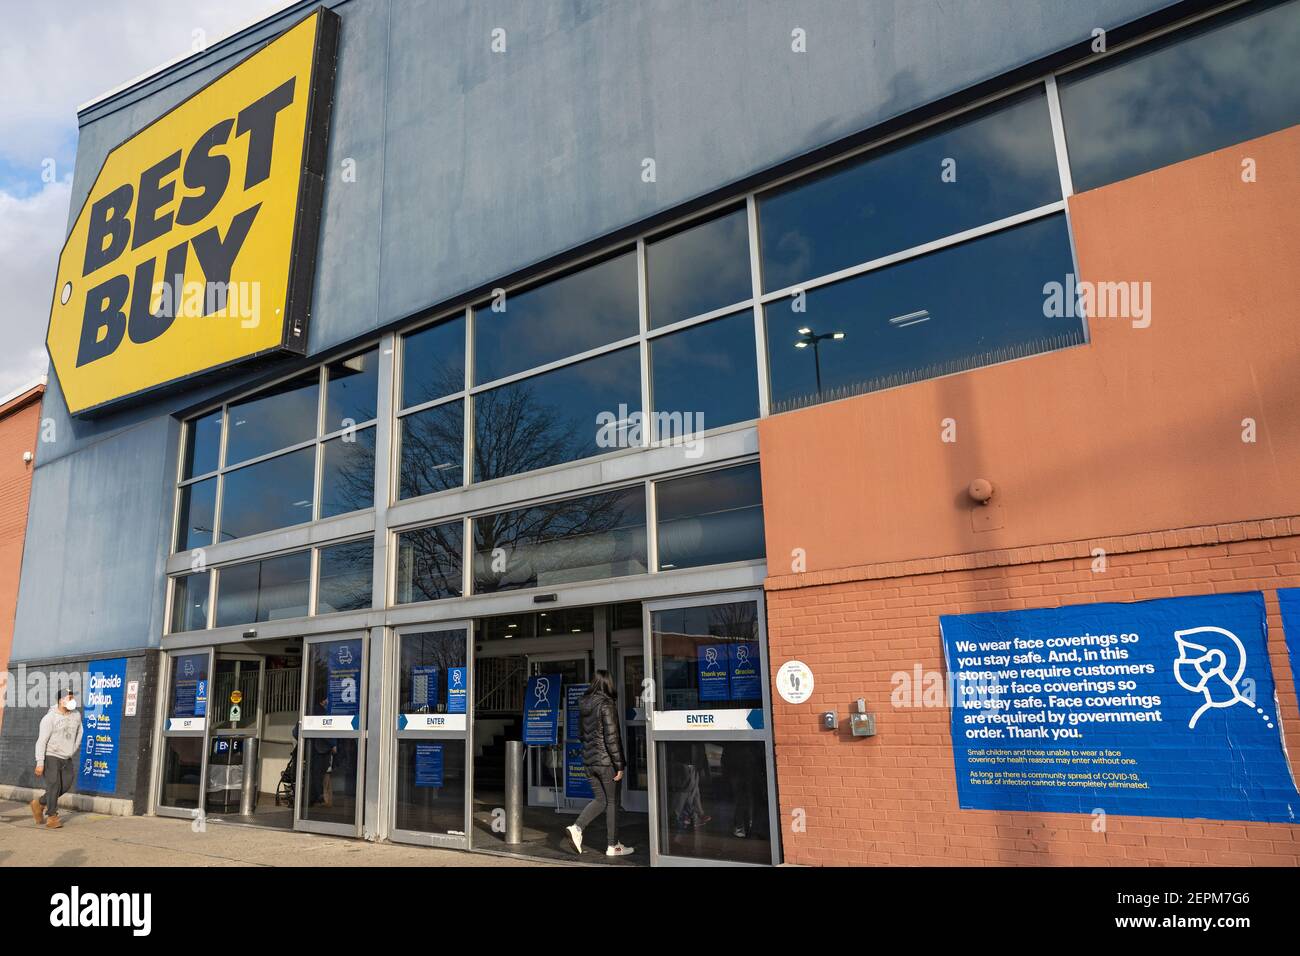 NEW YORK, NY – FEBRUARY 27:  A women walks in to a Best Buy store in Queens on February 27, 2021 in New York City.  Best Buy Co. (BBY) lays off 5,000 workers, the majority of whom worked full-time and adding approximately 2,000 new part-time positions as it shifts focus to online sales.  The pandemic has accelerated Best Buy's transition to selling online said Chief Executive Corie Barry on a call with analysts on Thursday. Credit: Ron Adar/Alamy Live News Stock Photo